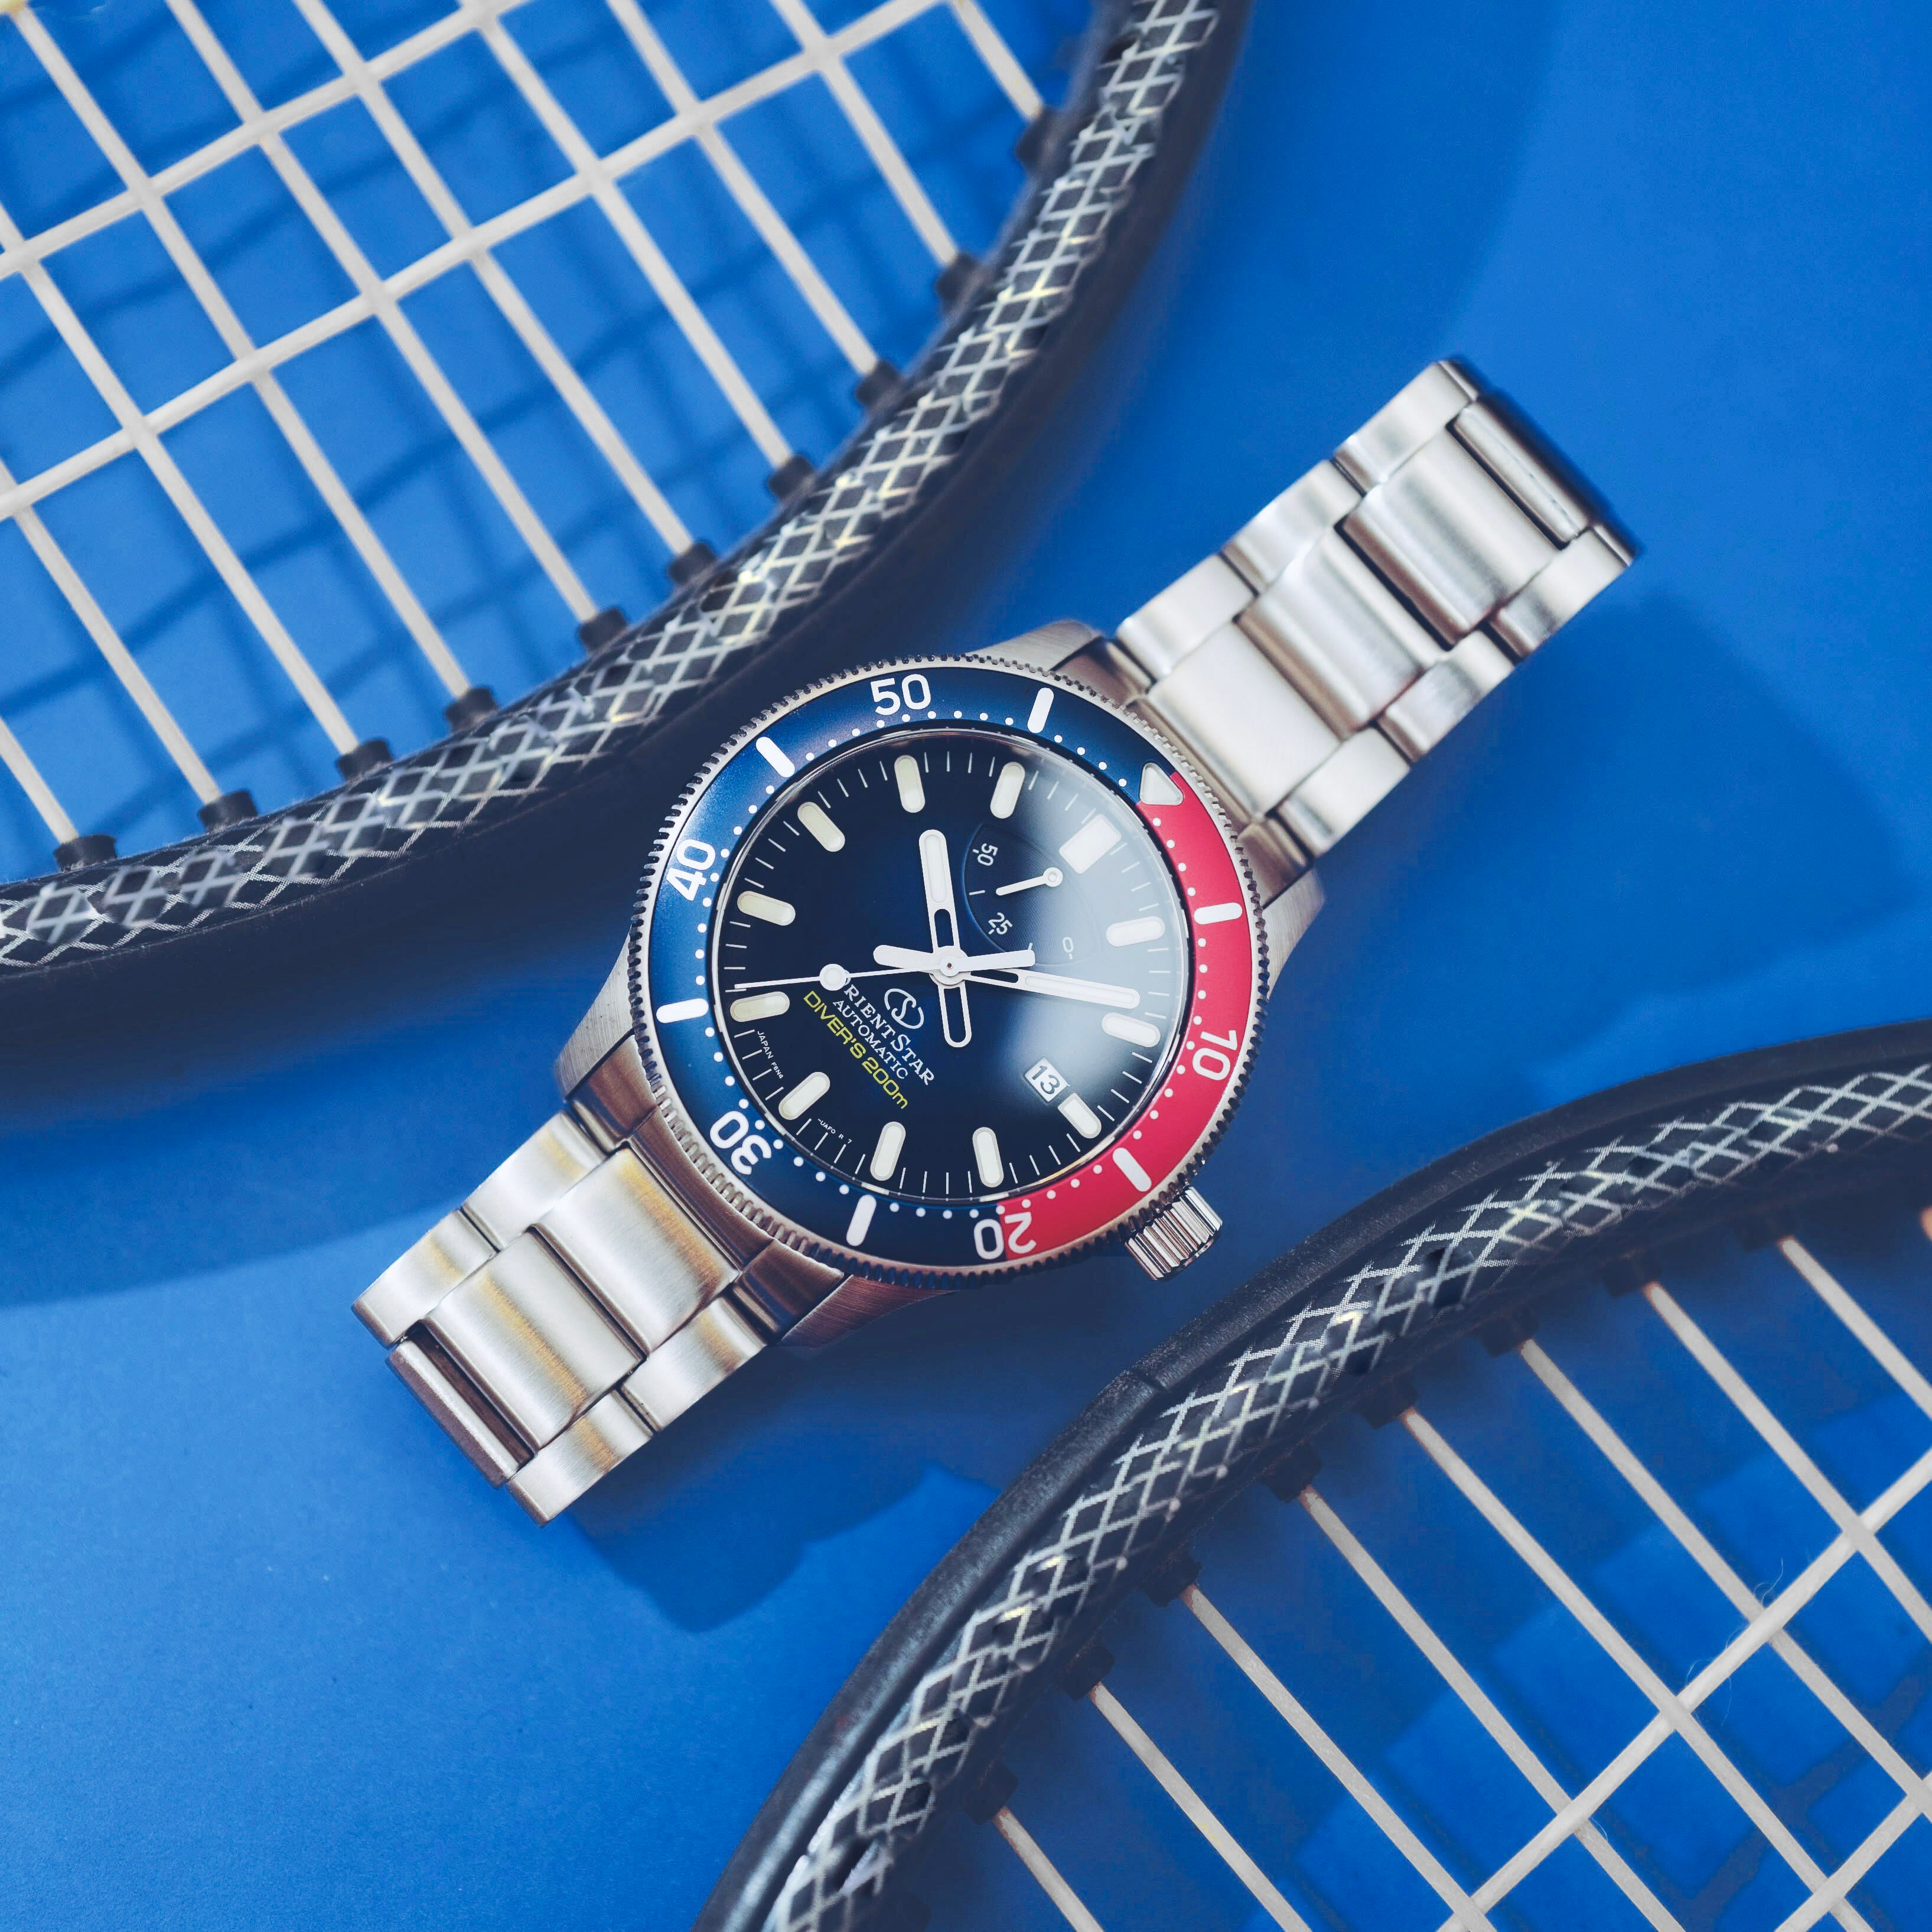 Representing our sports collection: the “Diver”